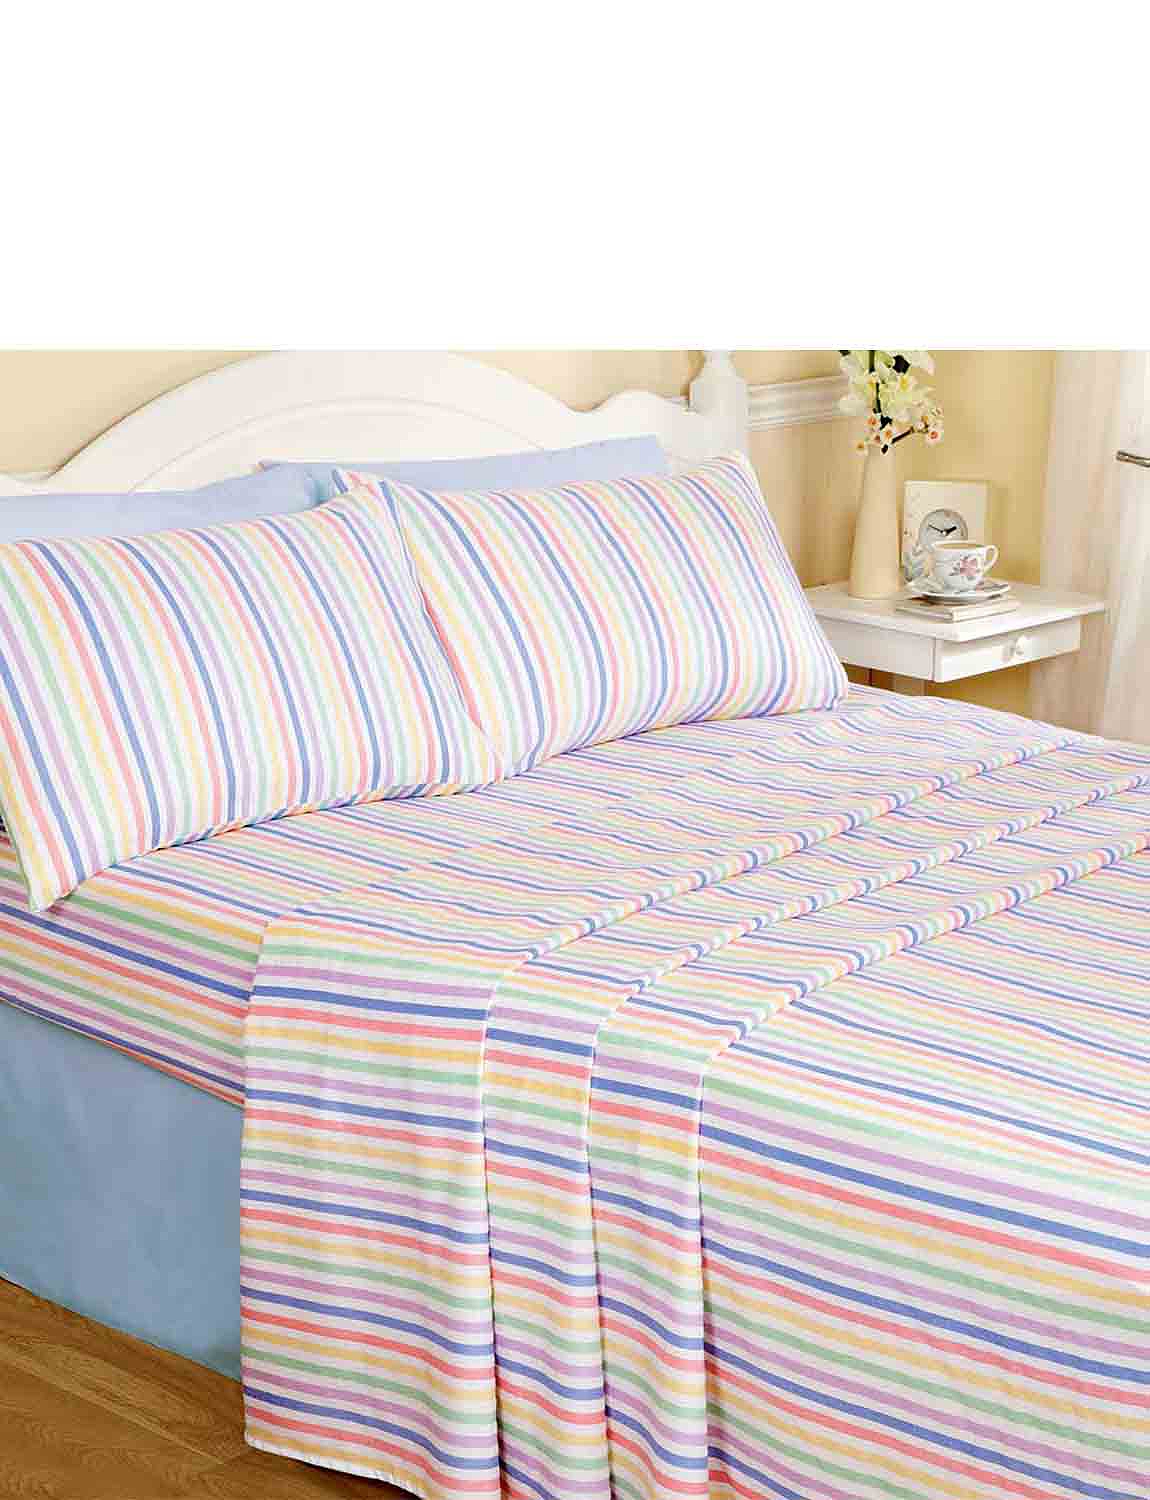 FLANNELETTE 100% BRUSHED COTTON  3' X 5'9" BED FITTED SHEET 14 SIZES 